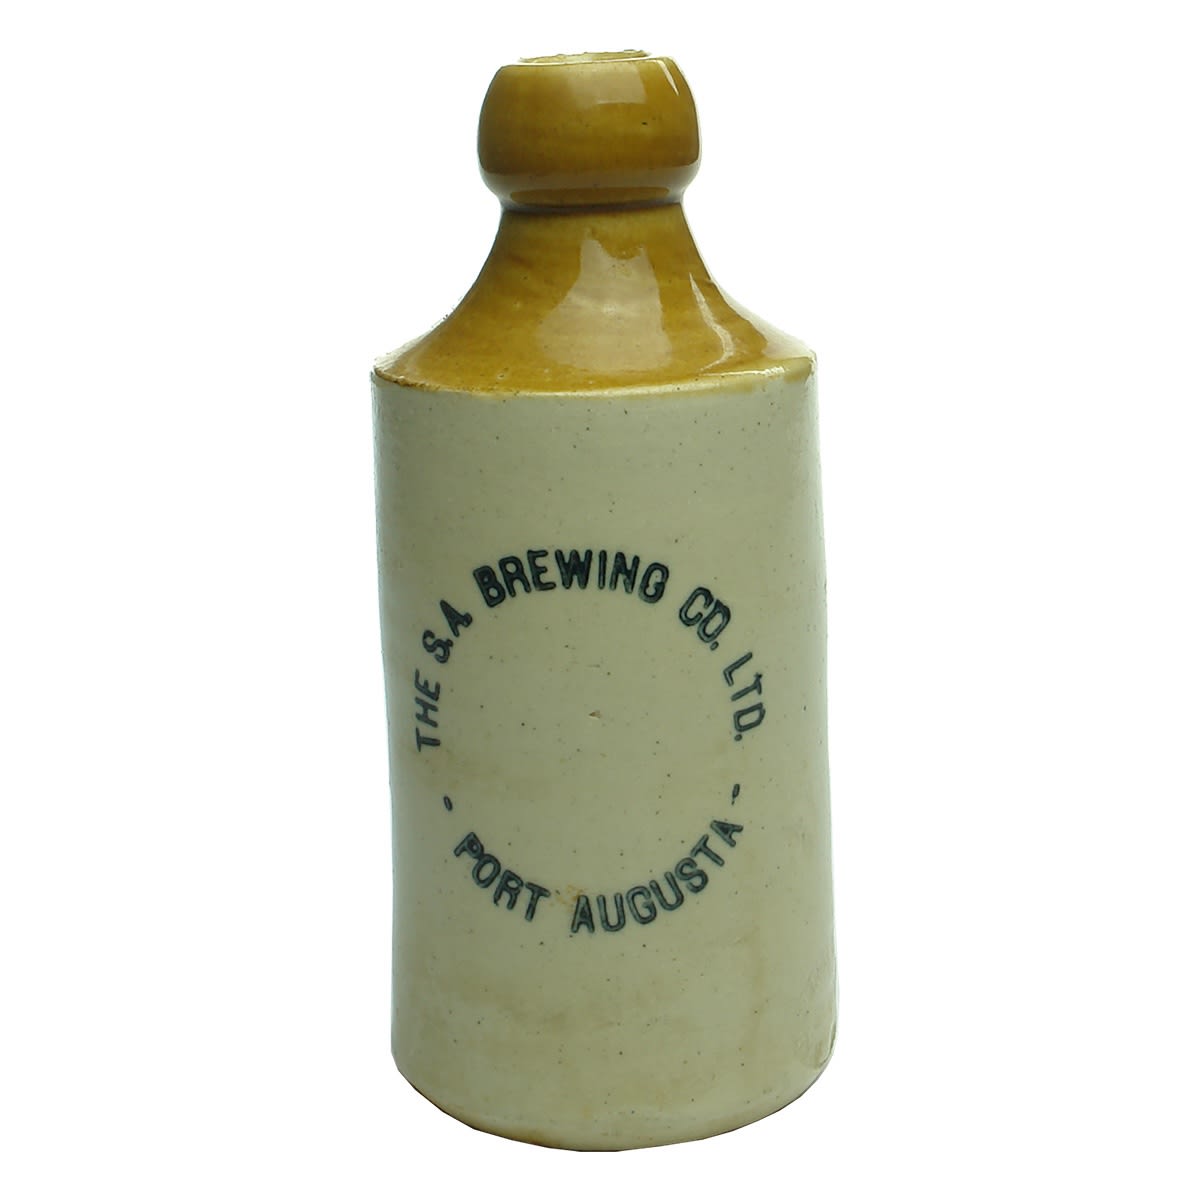 Ginger Beer. The S. A. Brewing Co. Ltd., Port Augusta. Tan Top. Dump. (South Australia)